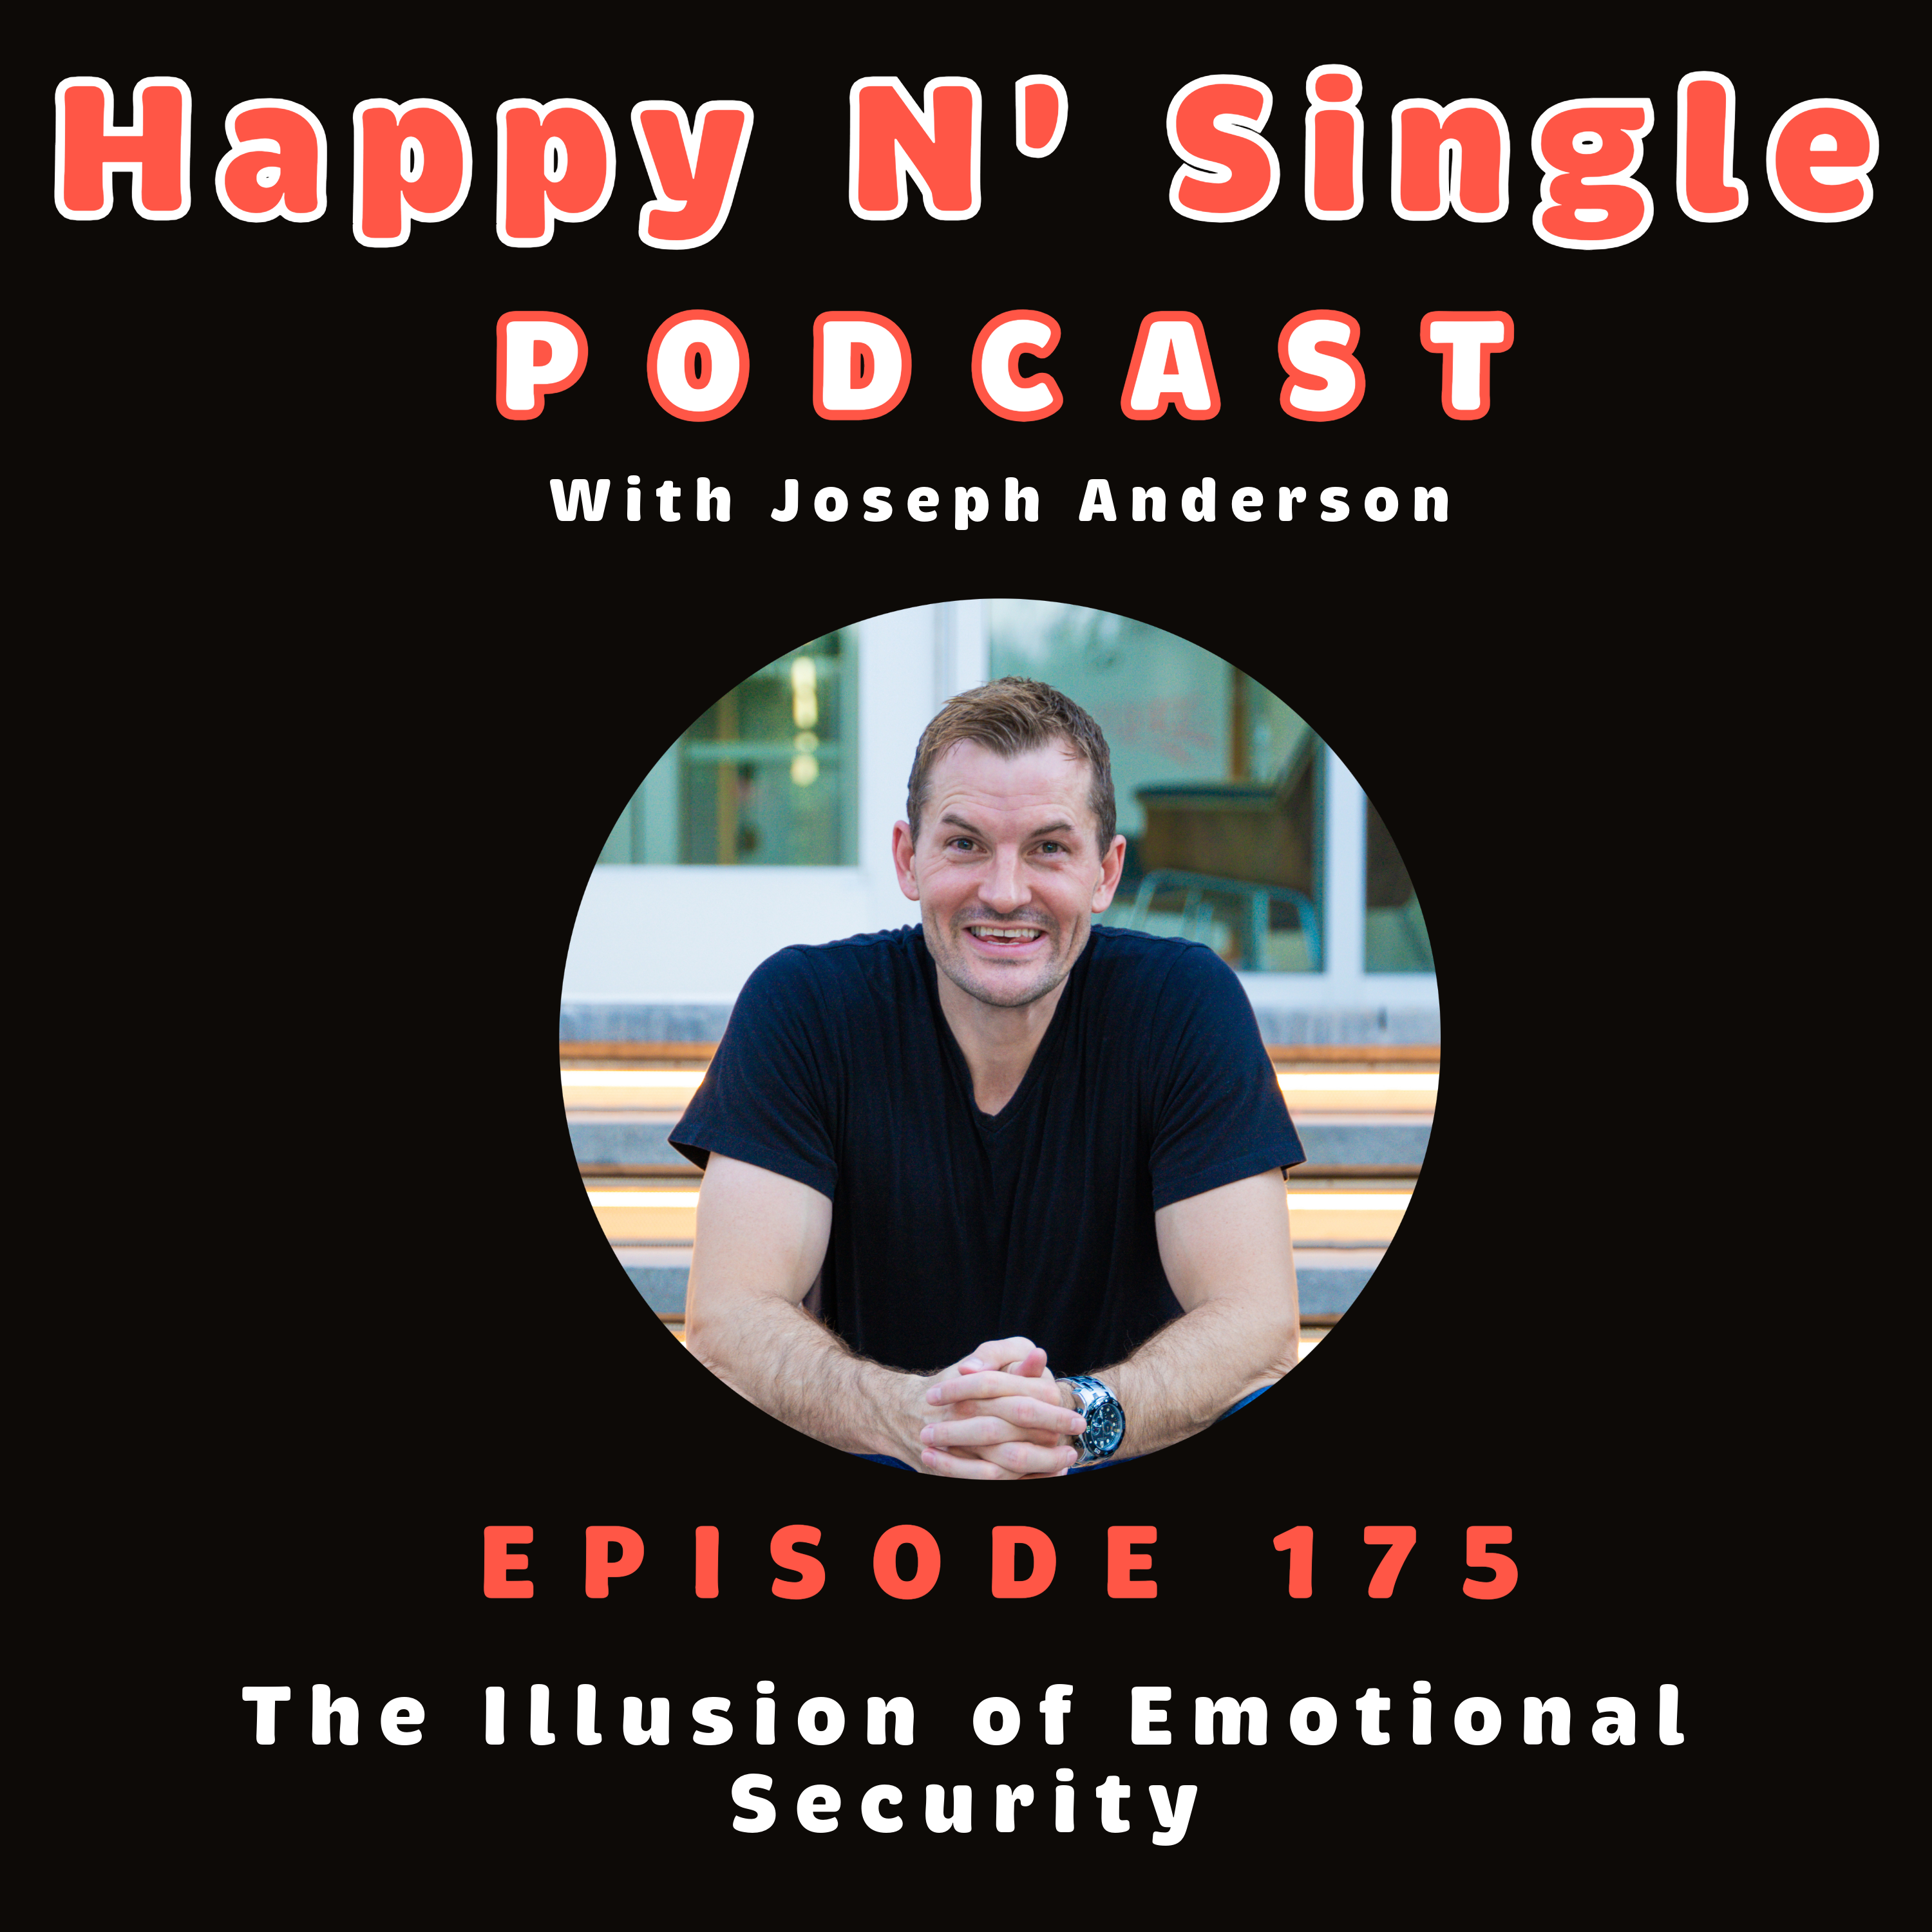 The Illusion of Emotional Security